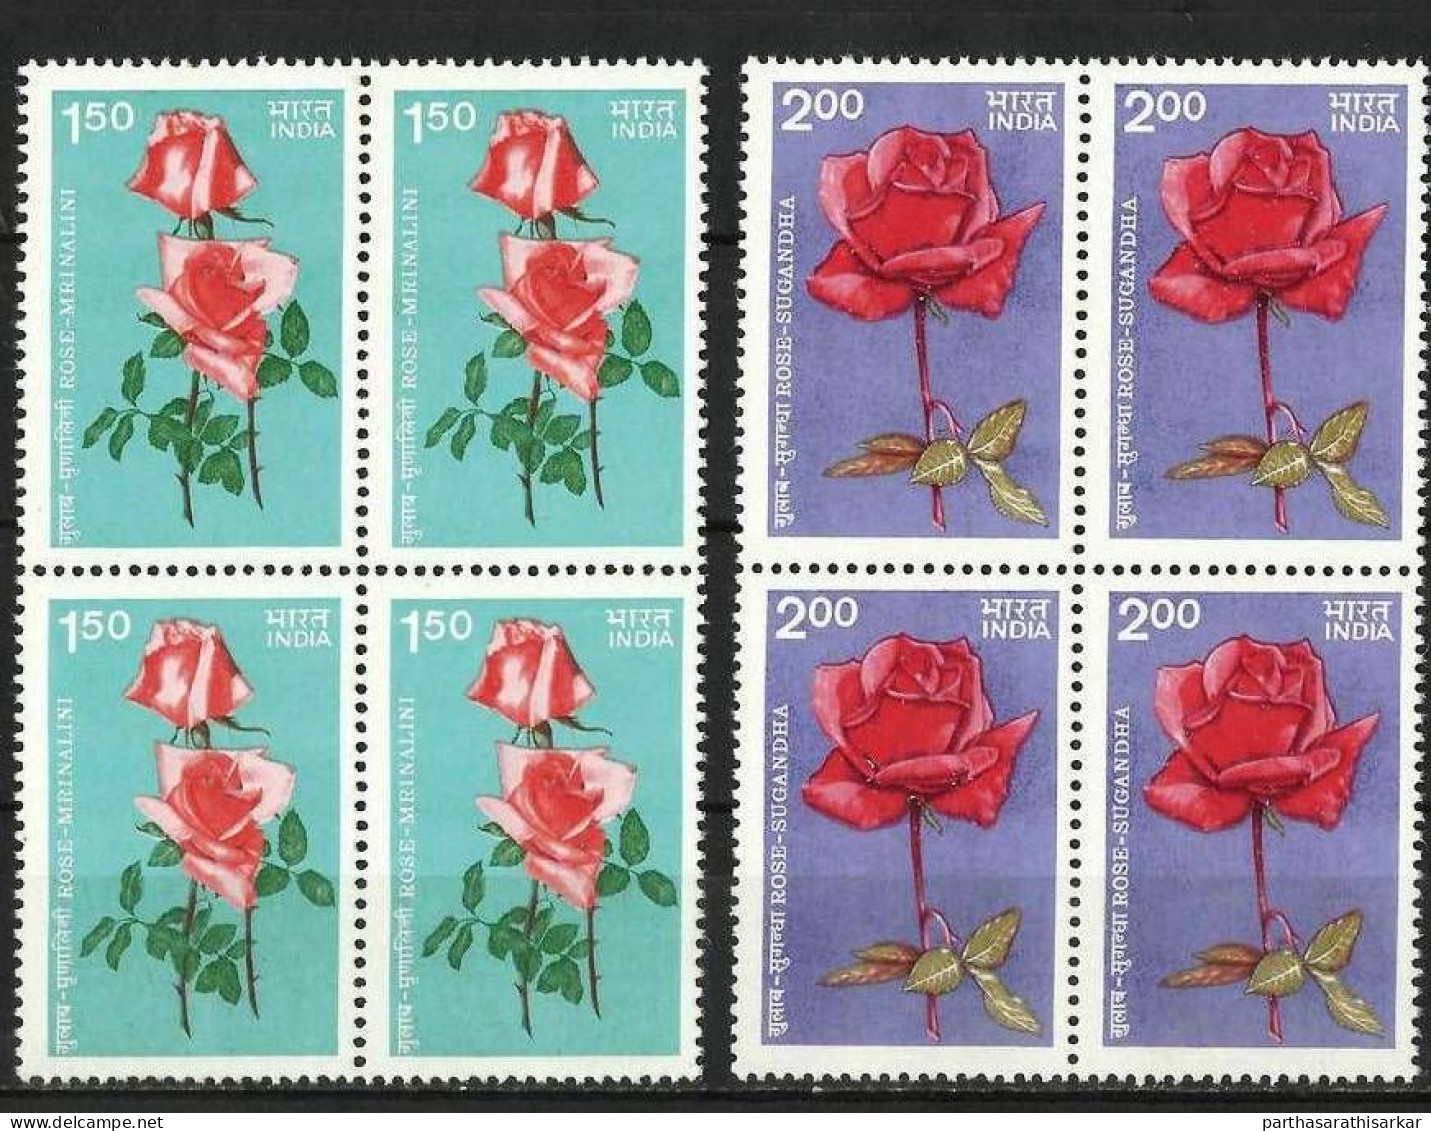 INDIA 1984 ROSES COMPLETE SET BLOCK OF 4 MNH - Nuovi